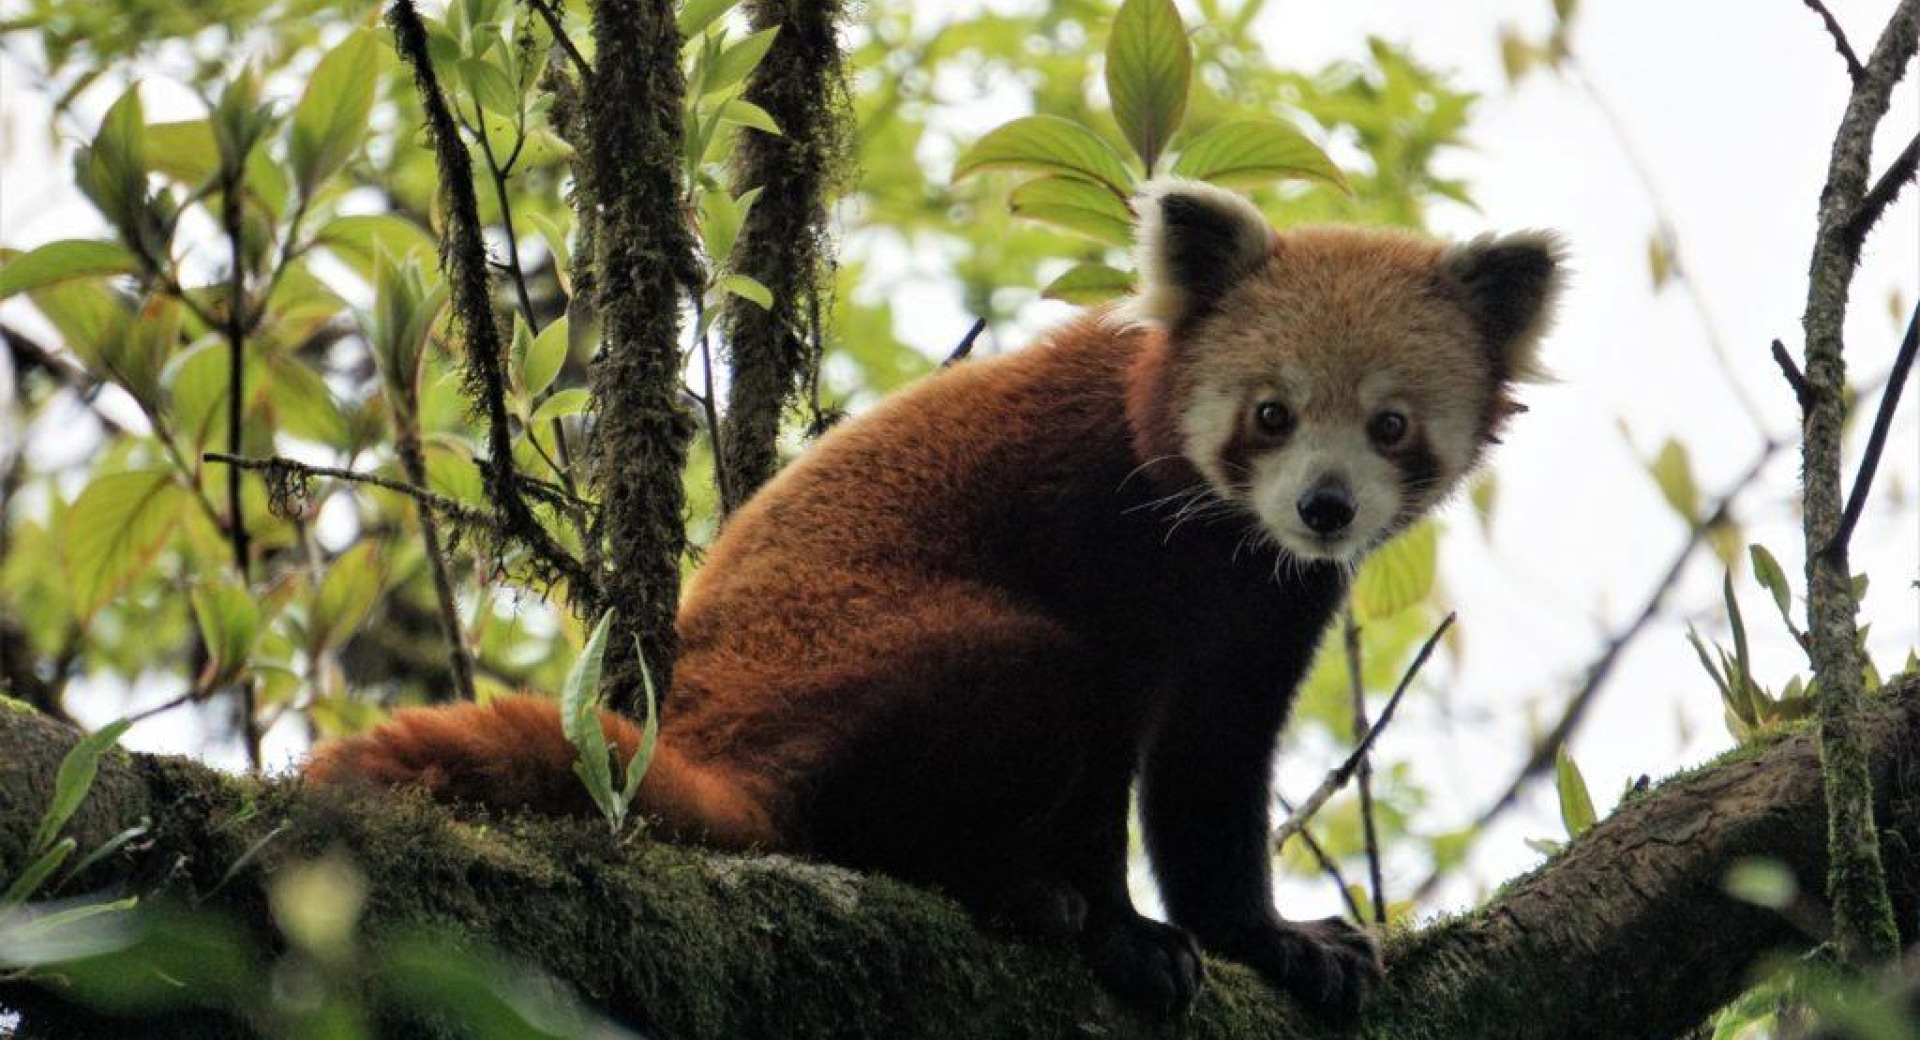 Help RPN Plant A Red Panda Home!